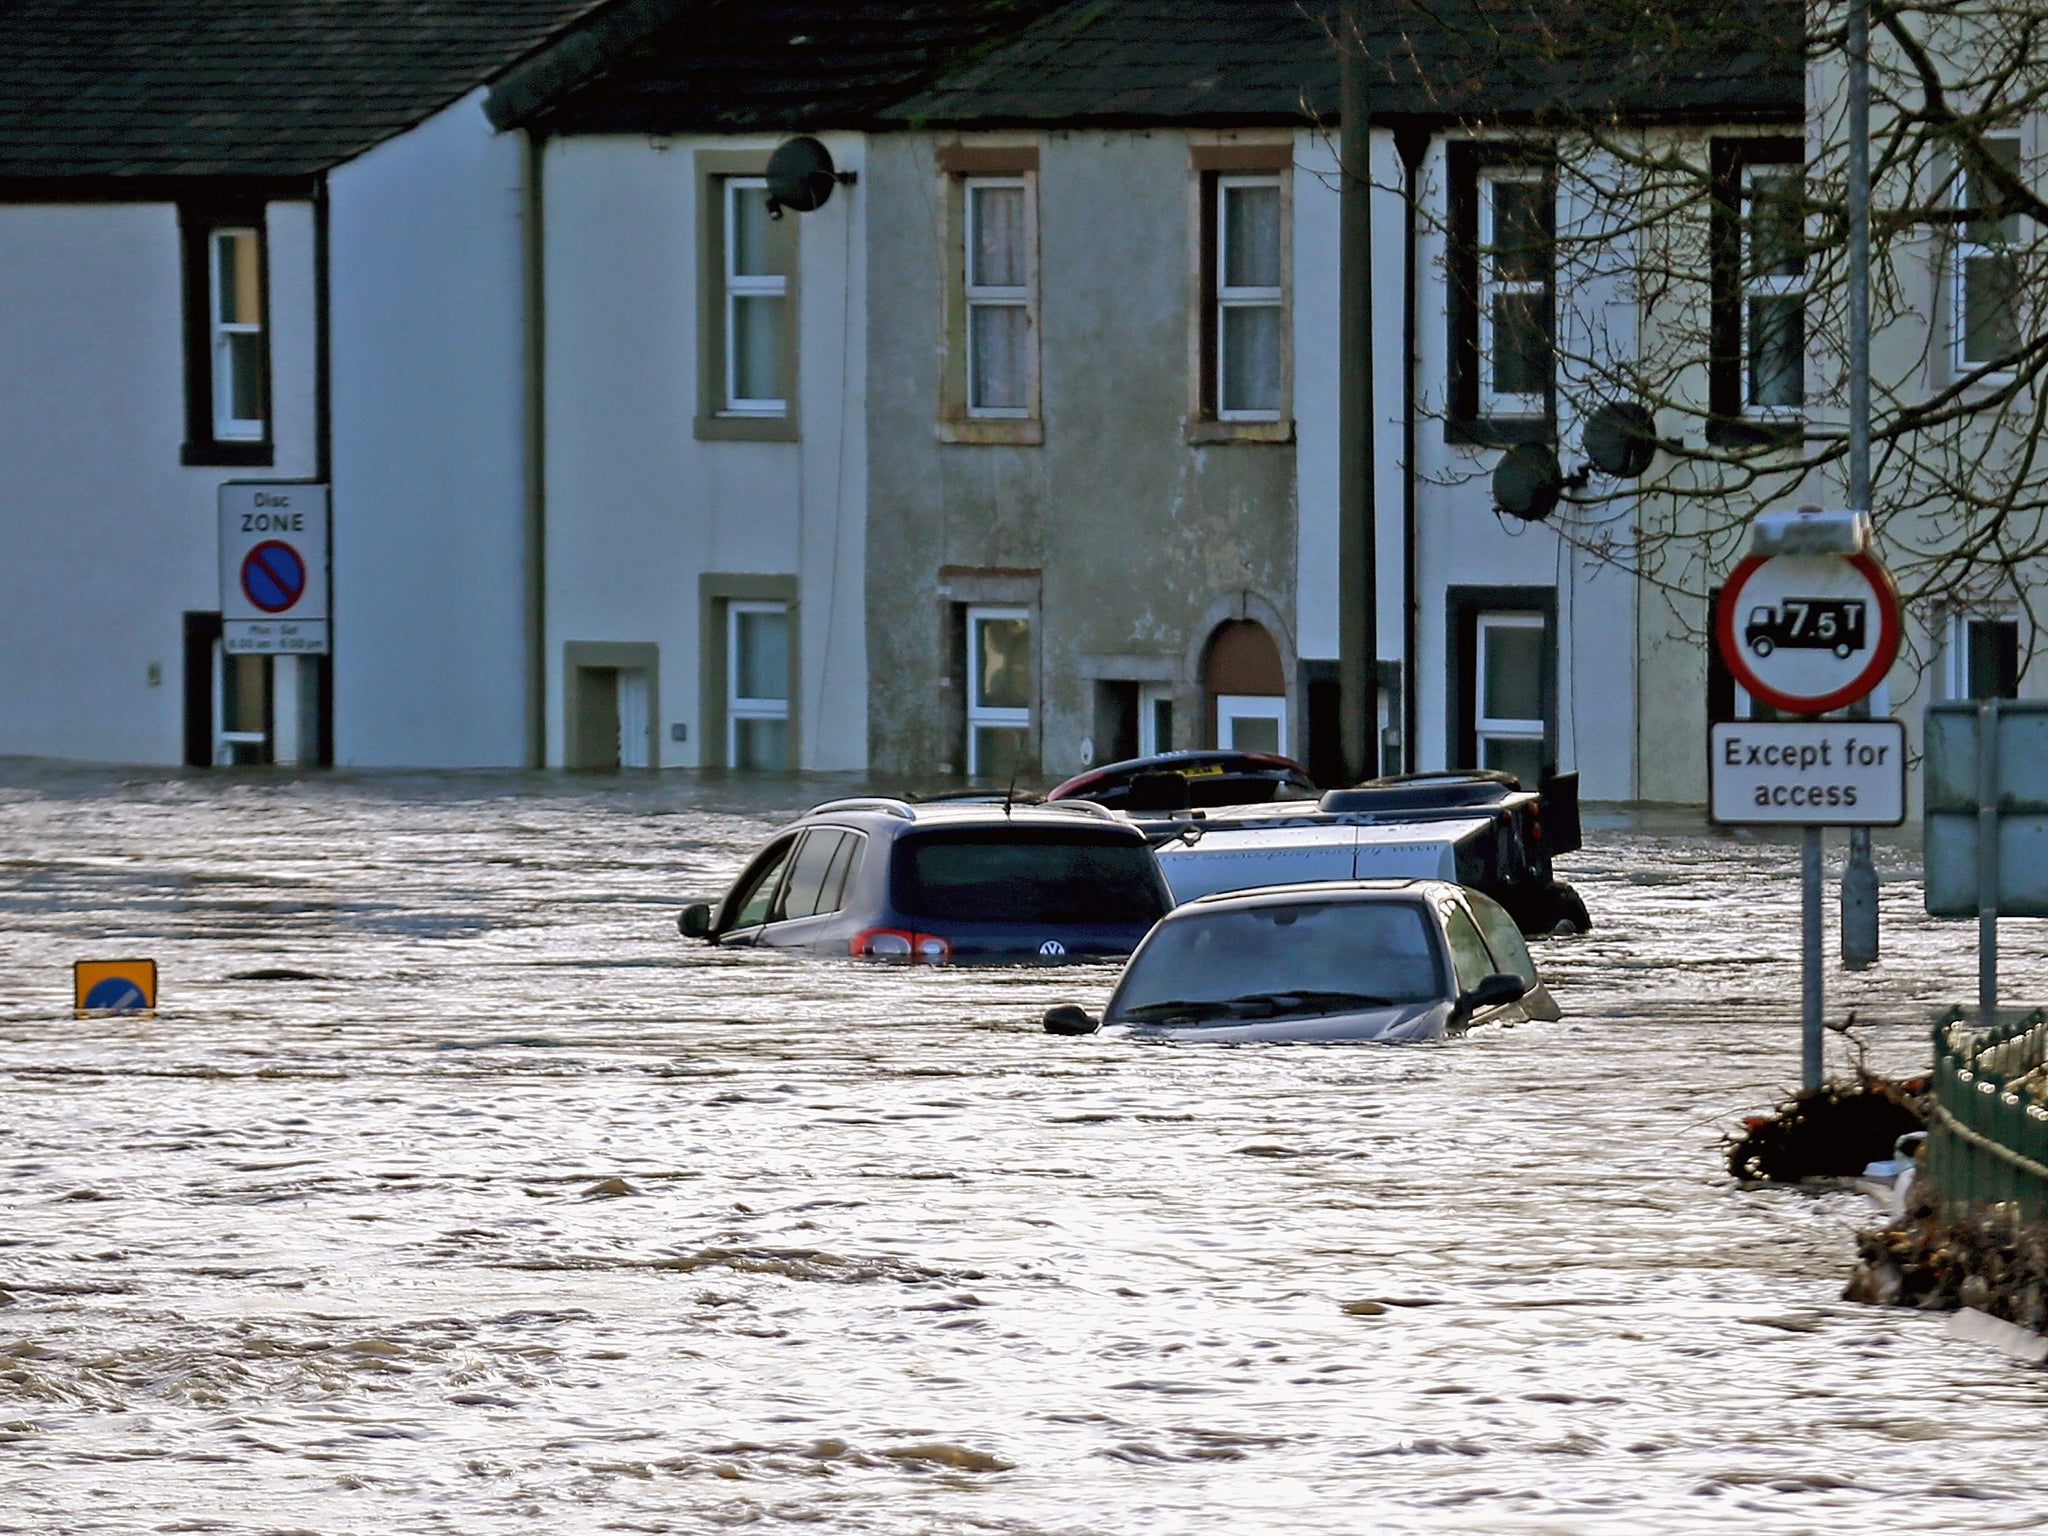 Storm Desmond raged creating financial problems for many